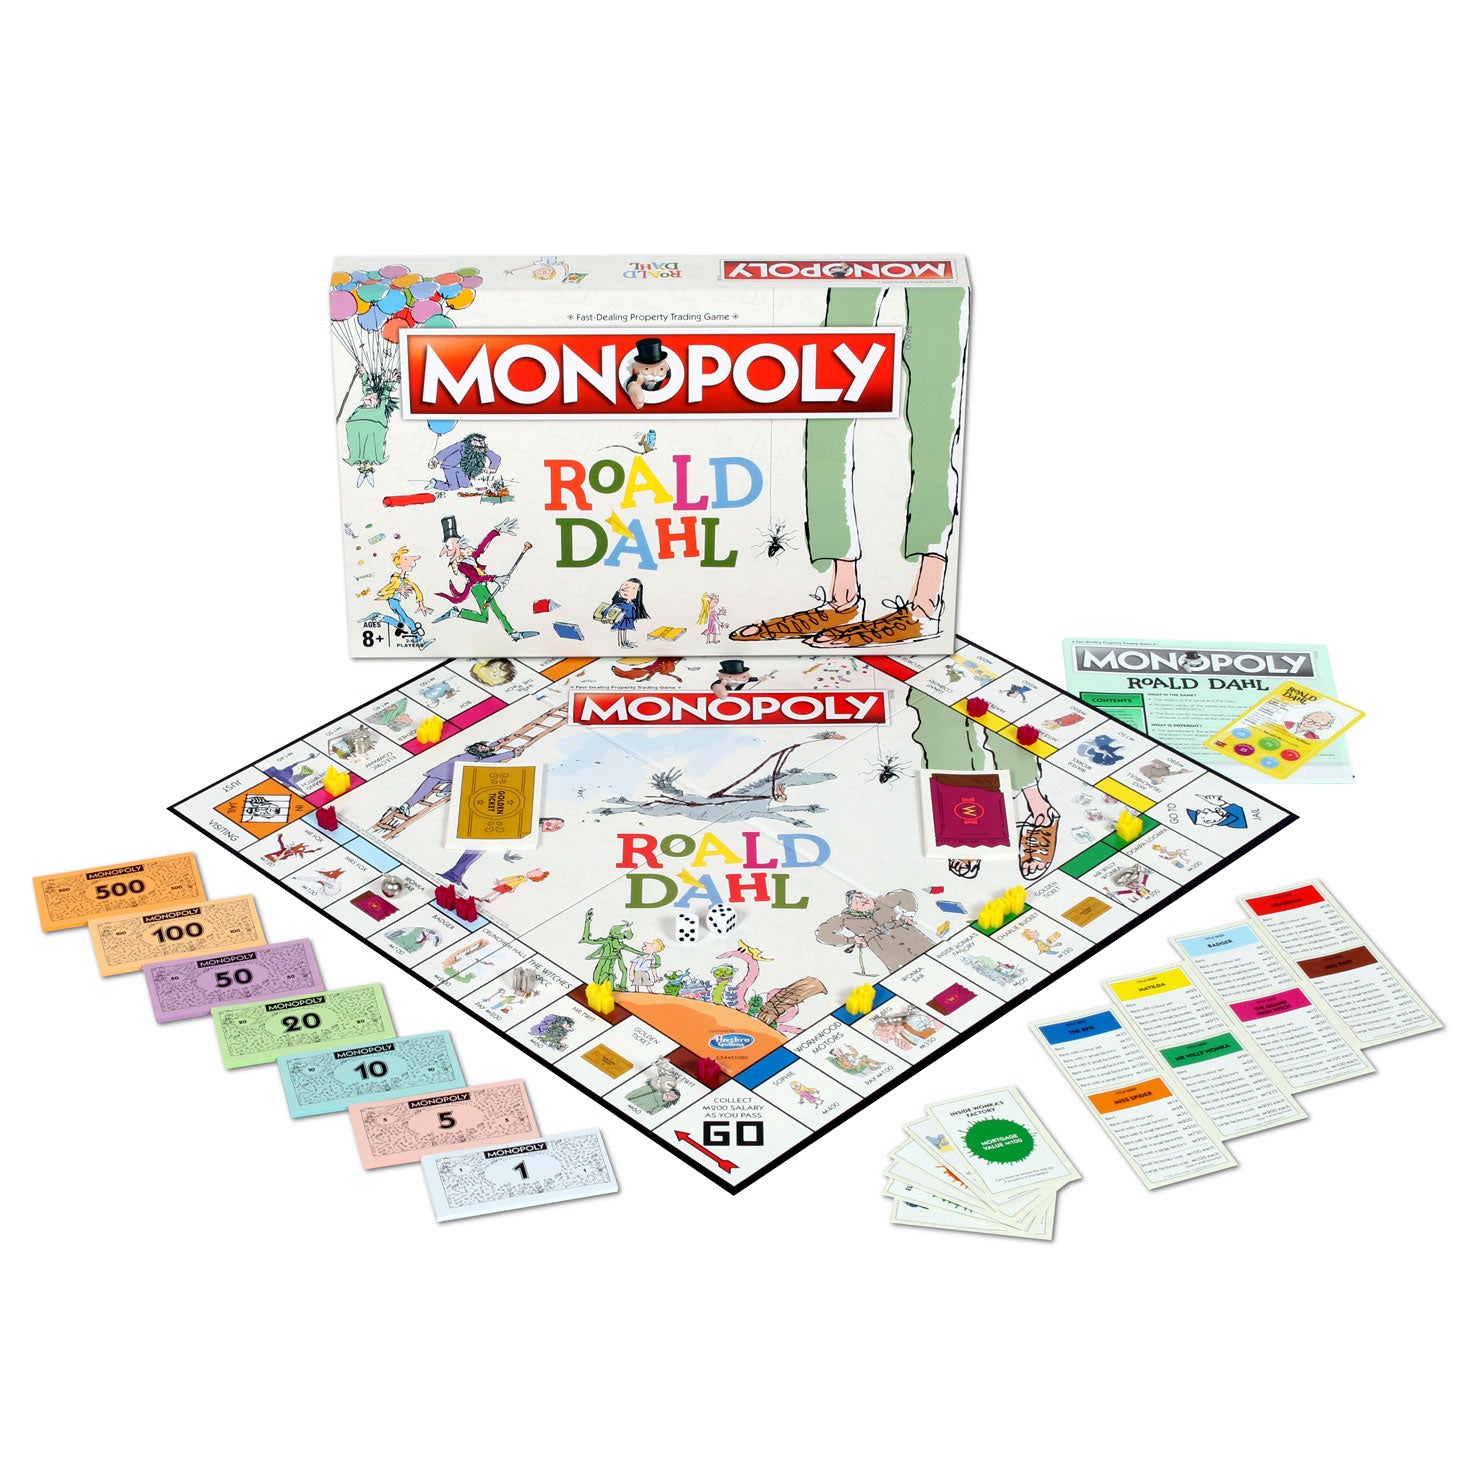 Monopoly board game based on characters by Roald Dahl and featuring Quentin Blake's illustrations- board, money and cards showing